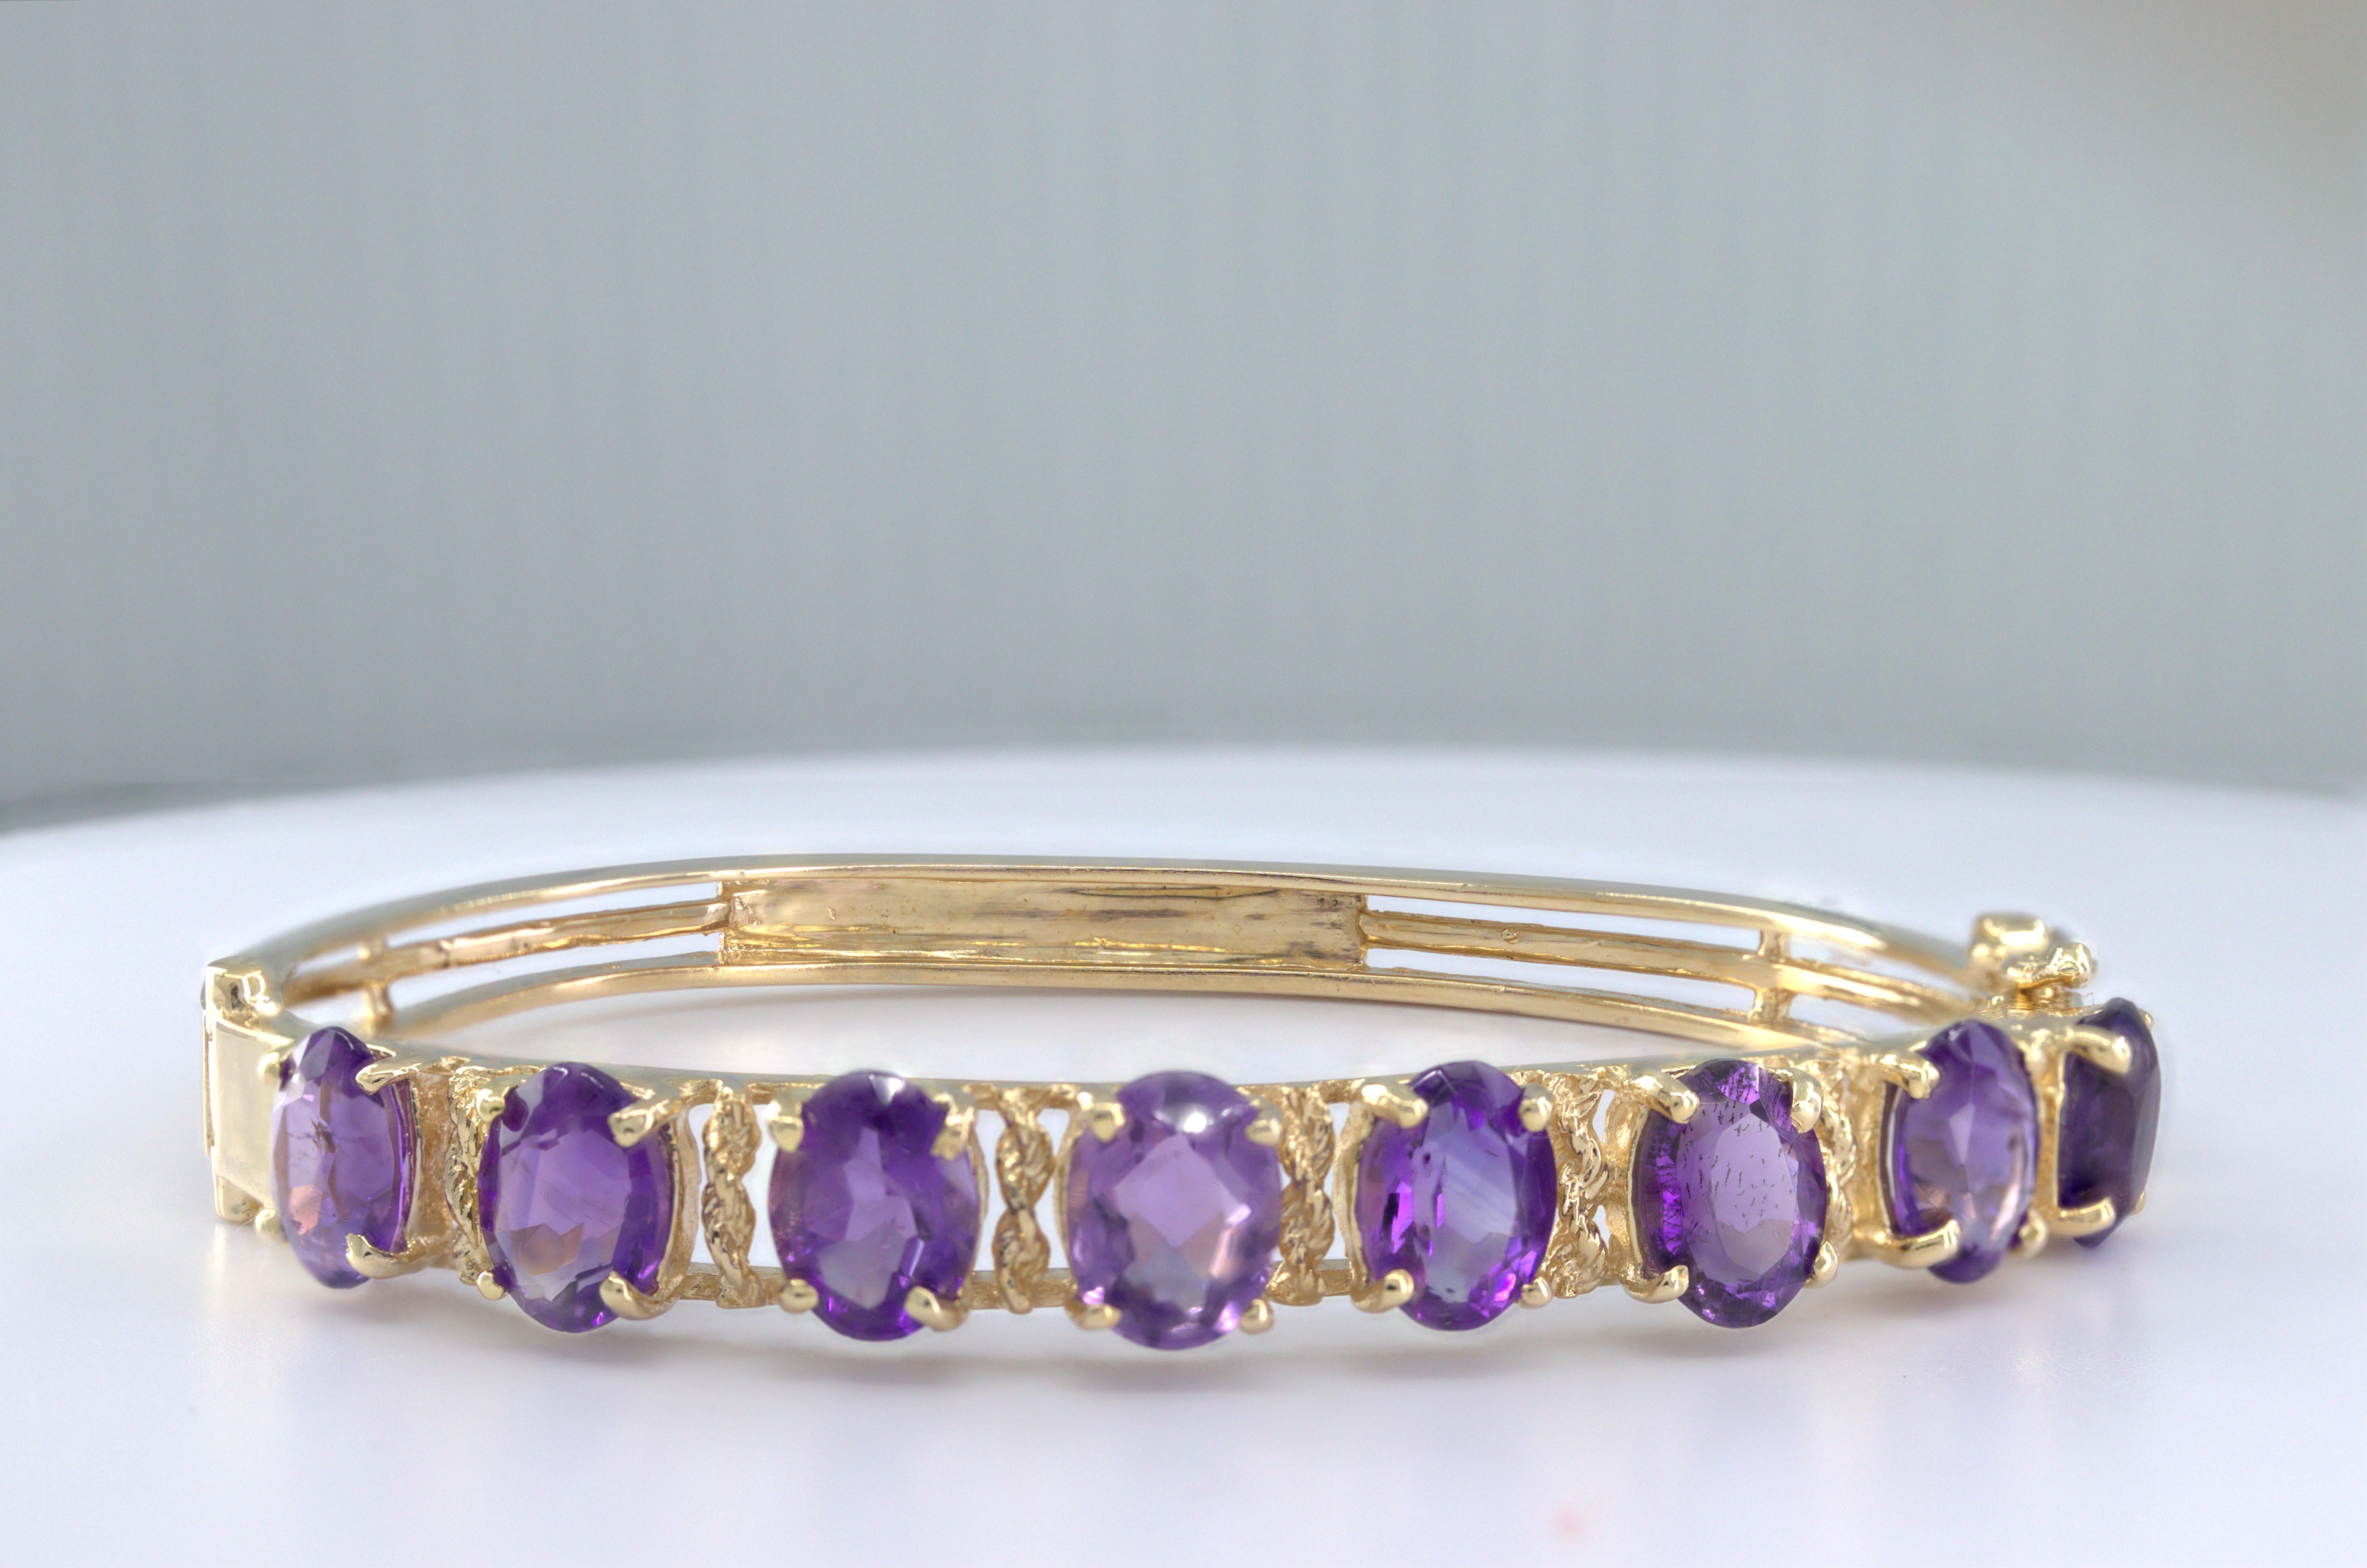 Featuring (8) oval-cut amethysts, 8.15 cts. tw., set in a 14k yellow gold rope twist, hinged bangle mounting, with a tongue and groove clasp and figure eight safety, tapering from 6.9 mm to 3.9 mm, 54.2 mm widest internal diameter, Gross weight